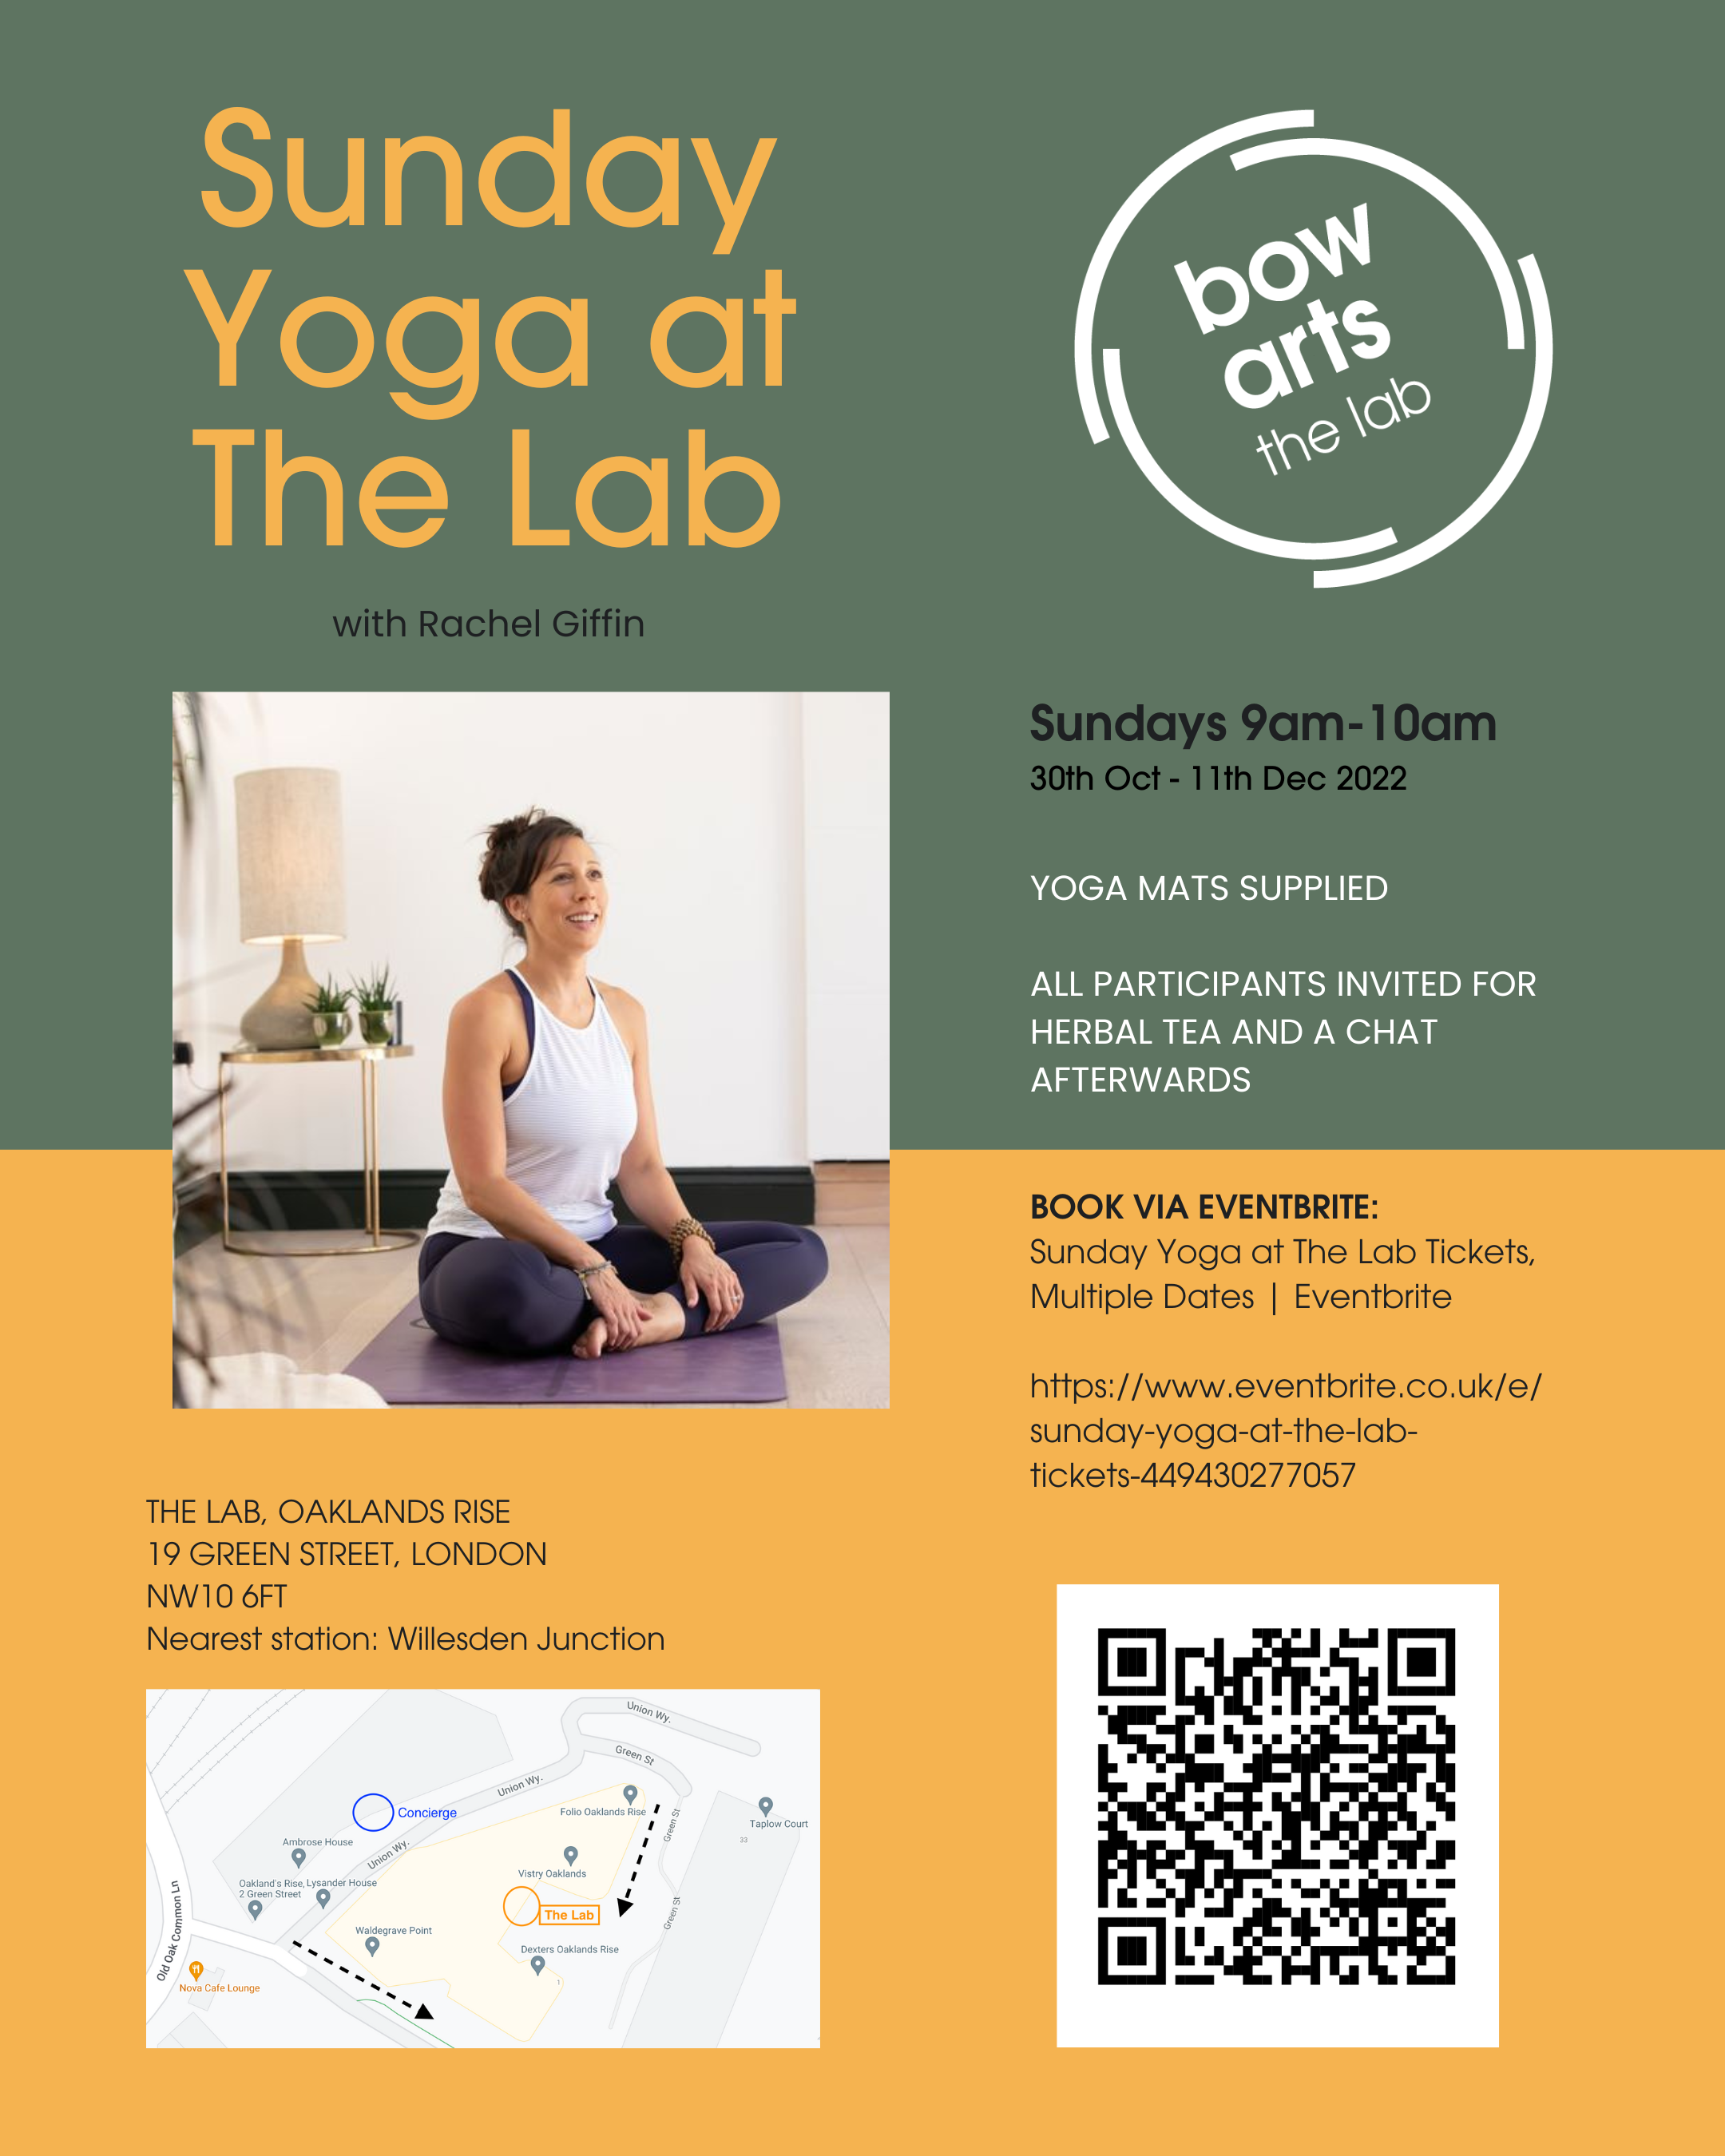 A poster for Sunday Yoga at The Lab